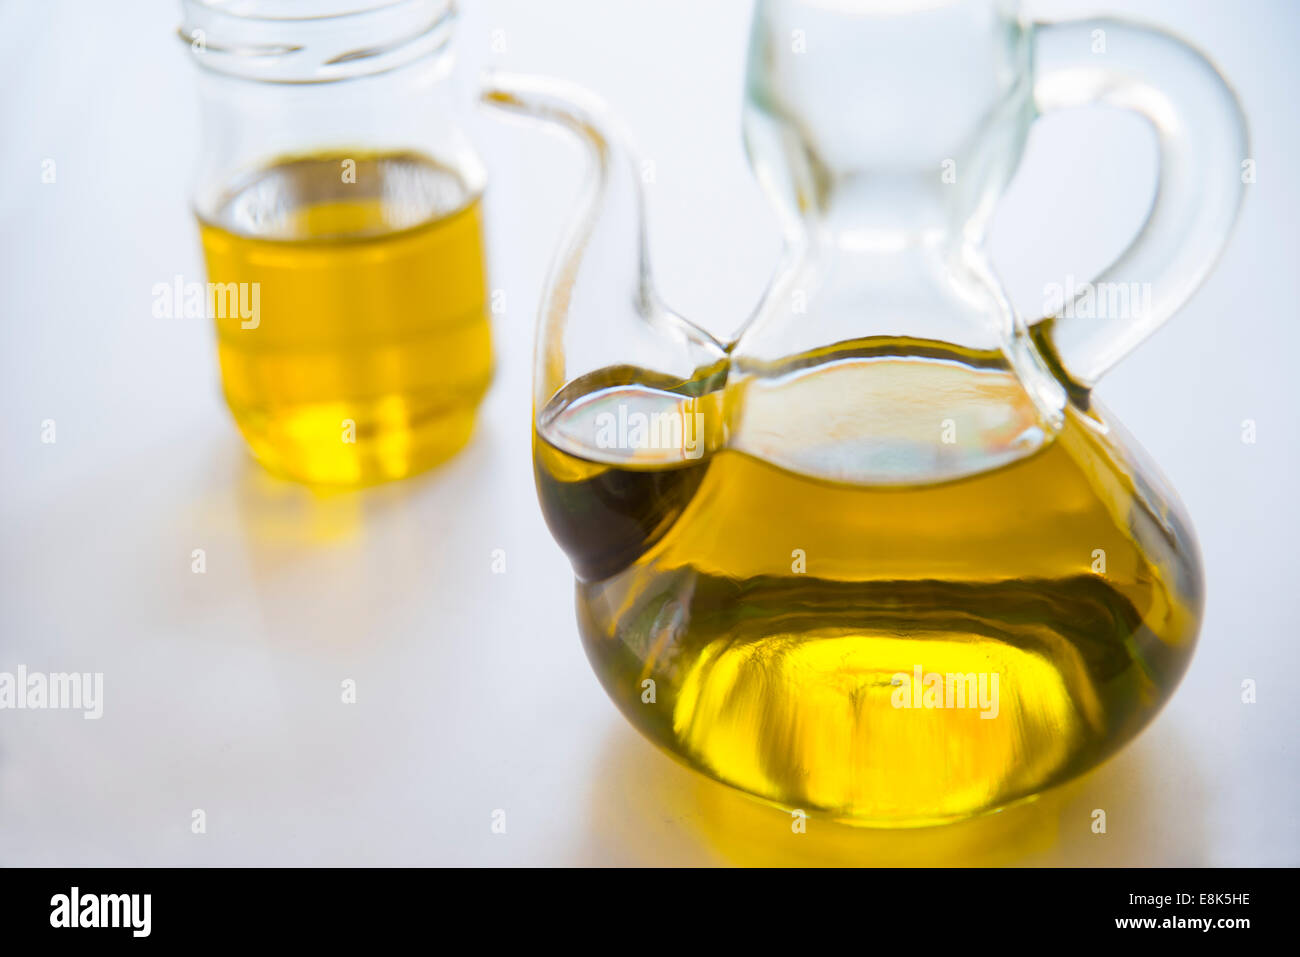 Oil bottle with olive oil. Still life. Stock Photo